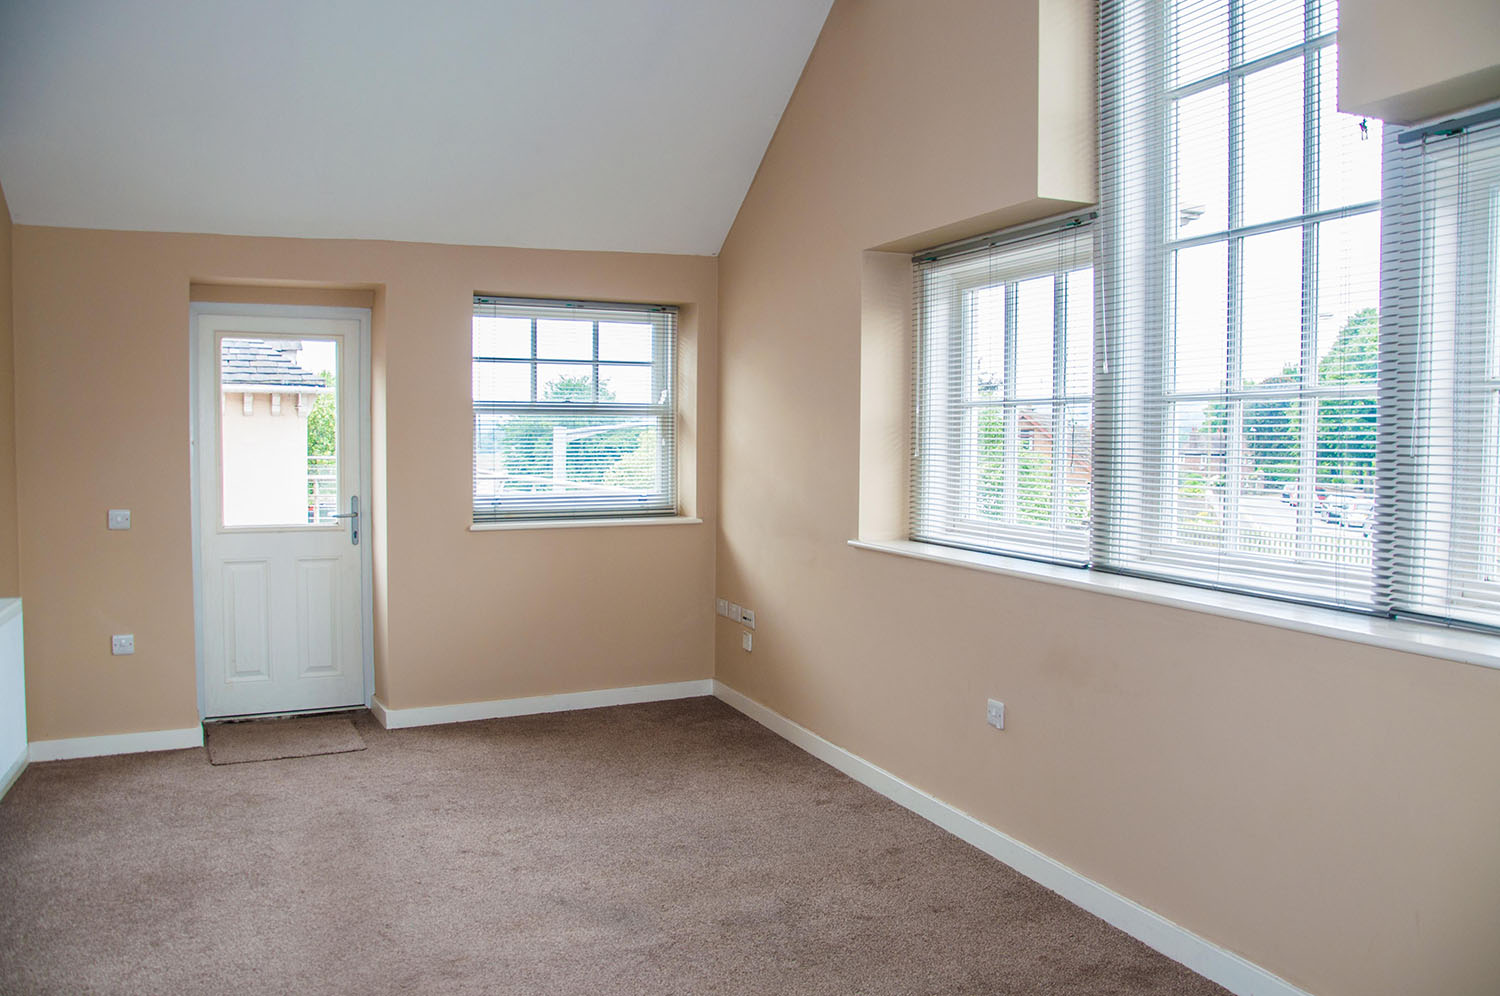 Empty living room with gray carpet and beige walls with a door leading outside and 4 large windows